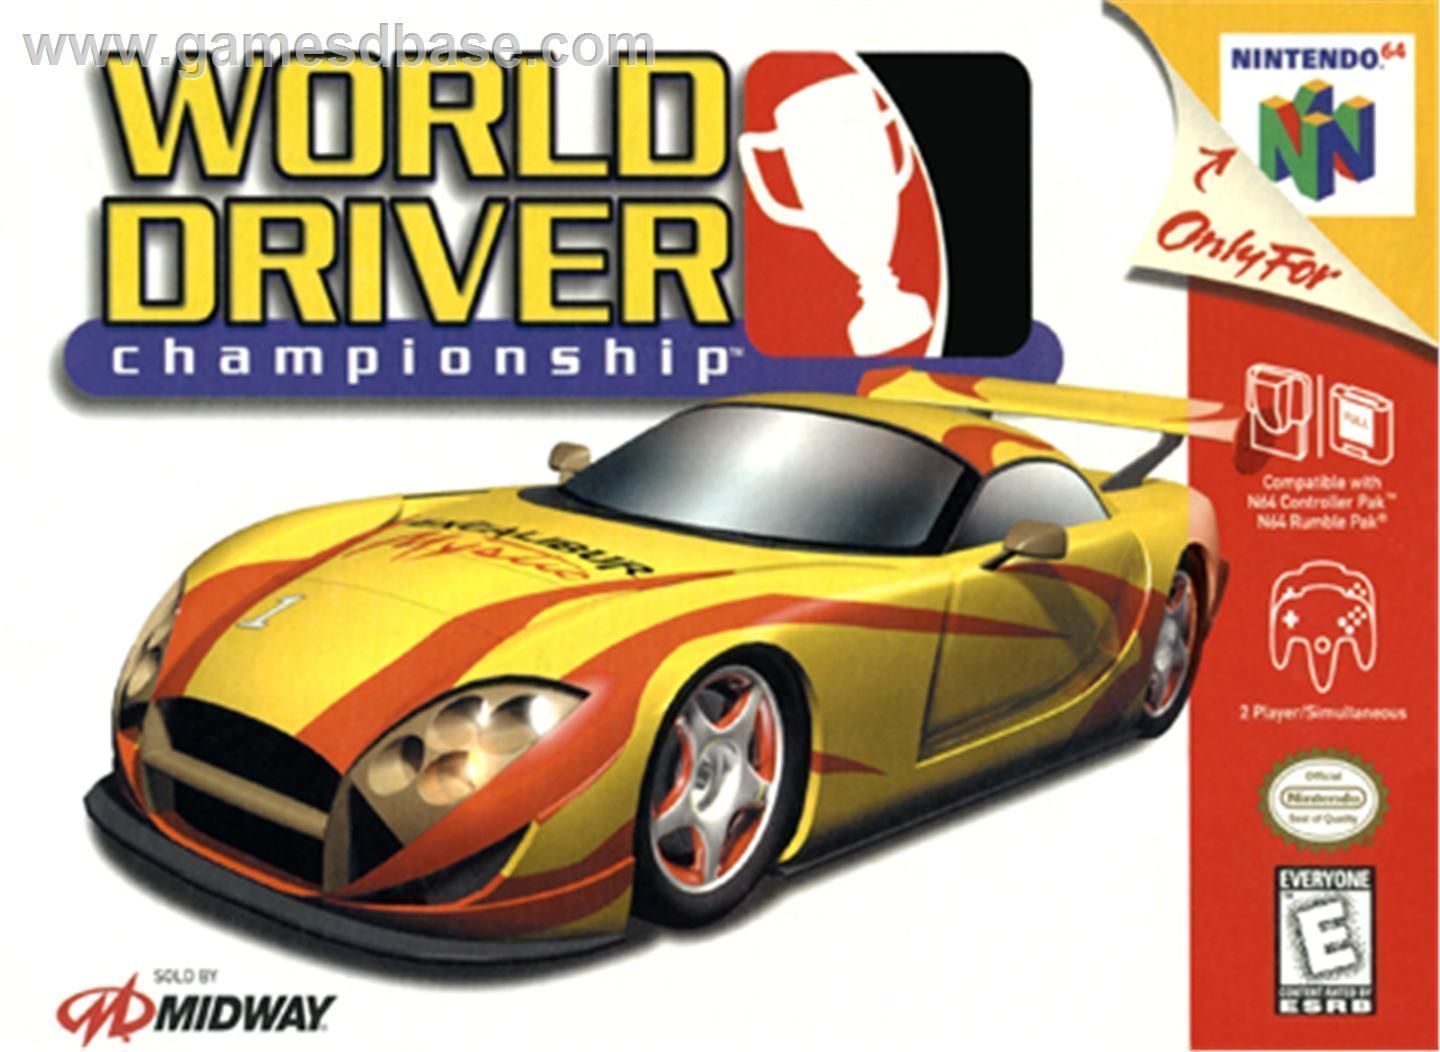 World Driver Championship N64 Replay Value